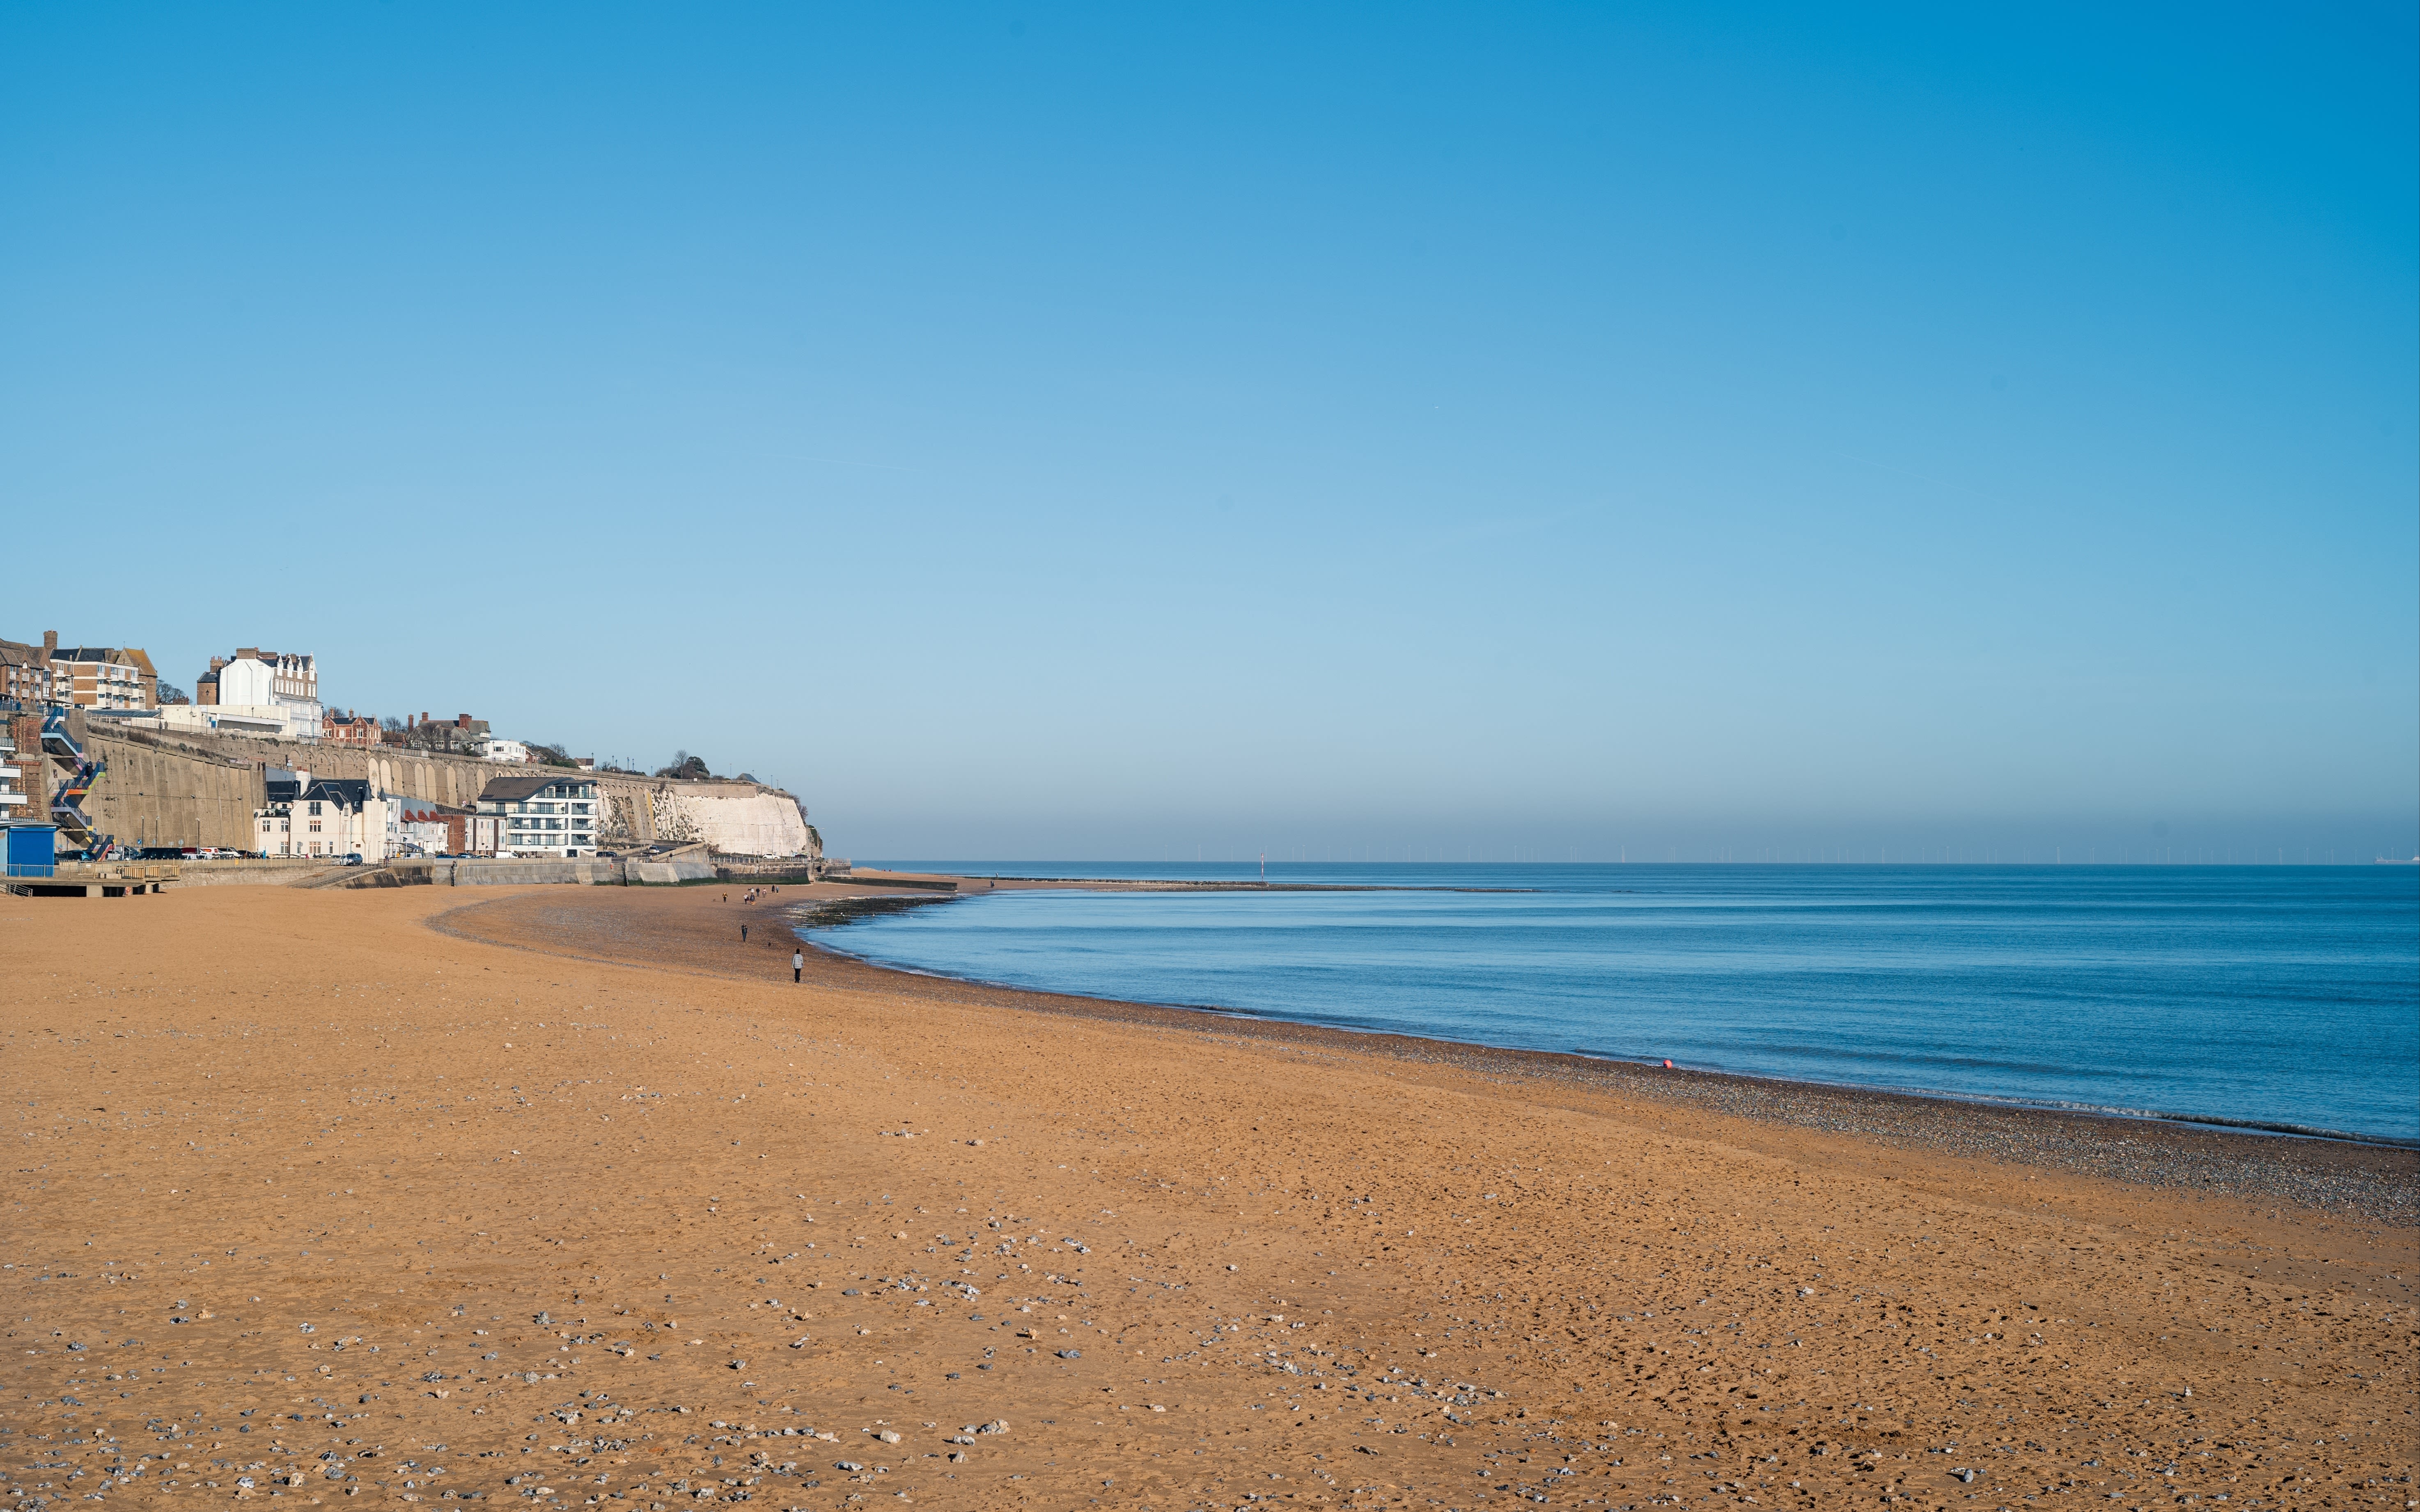 An image of a beach in Ramsgate